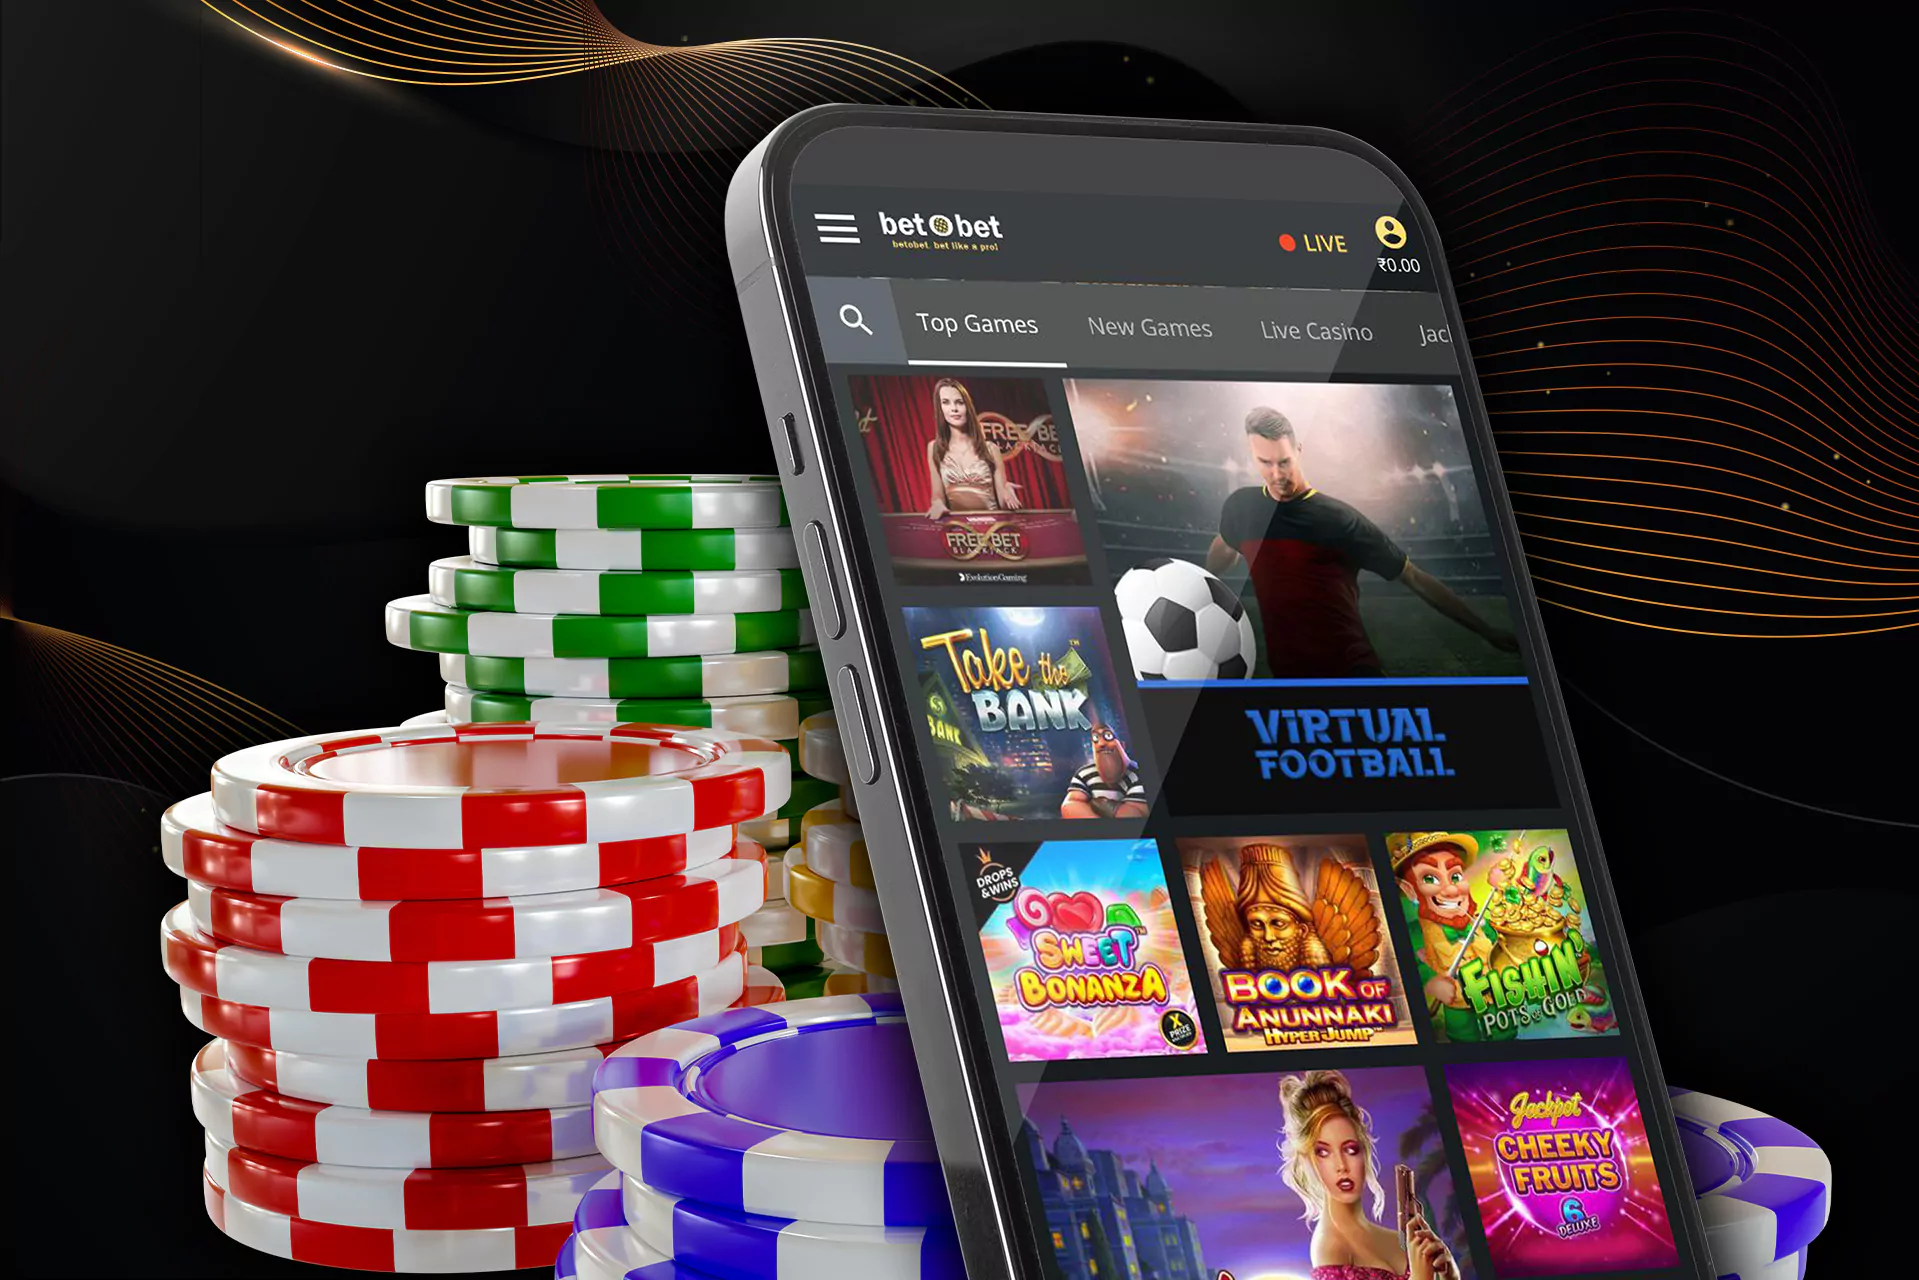 Play poker games and lotteries in the mobile app.